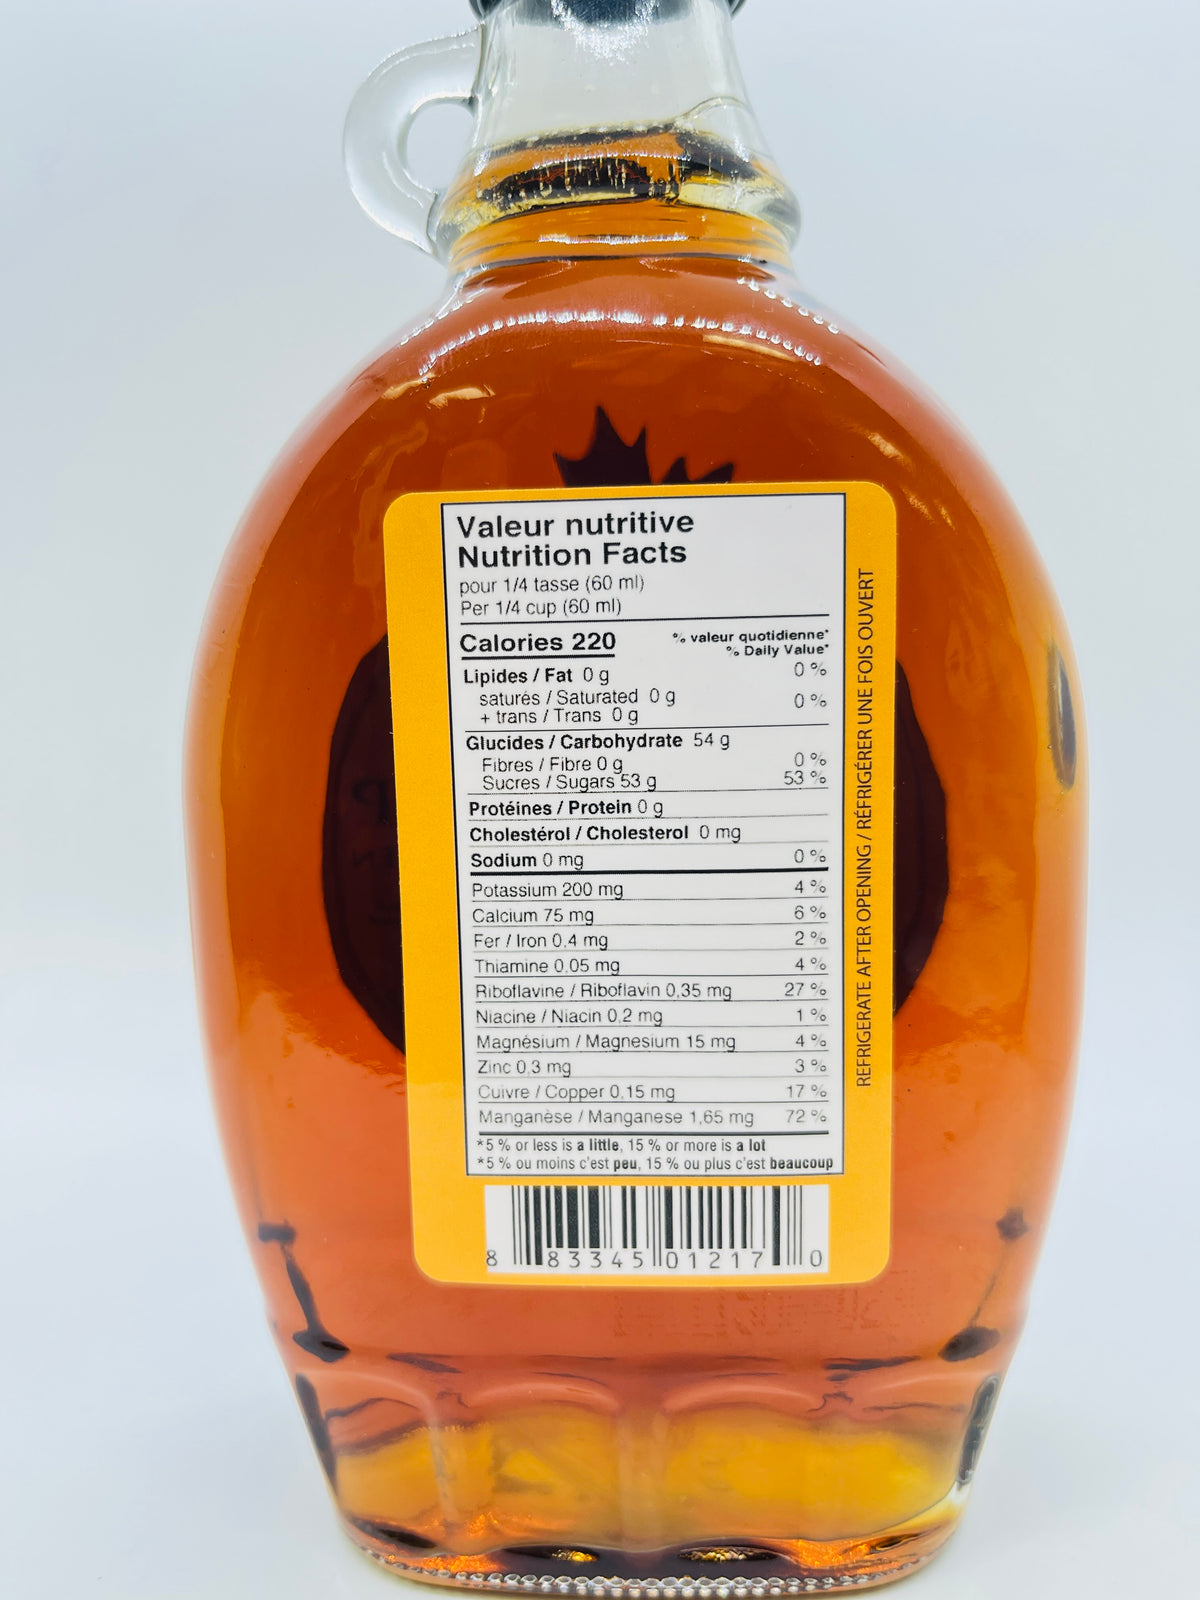 100% Pure Canadian Maple Syrup - Amber Rich Taste